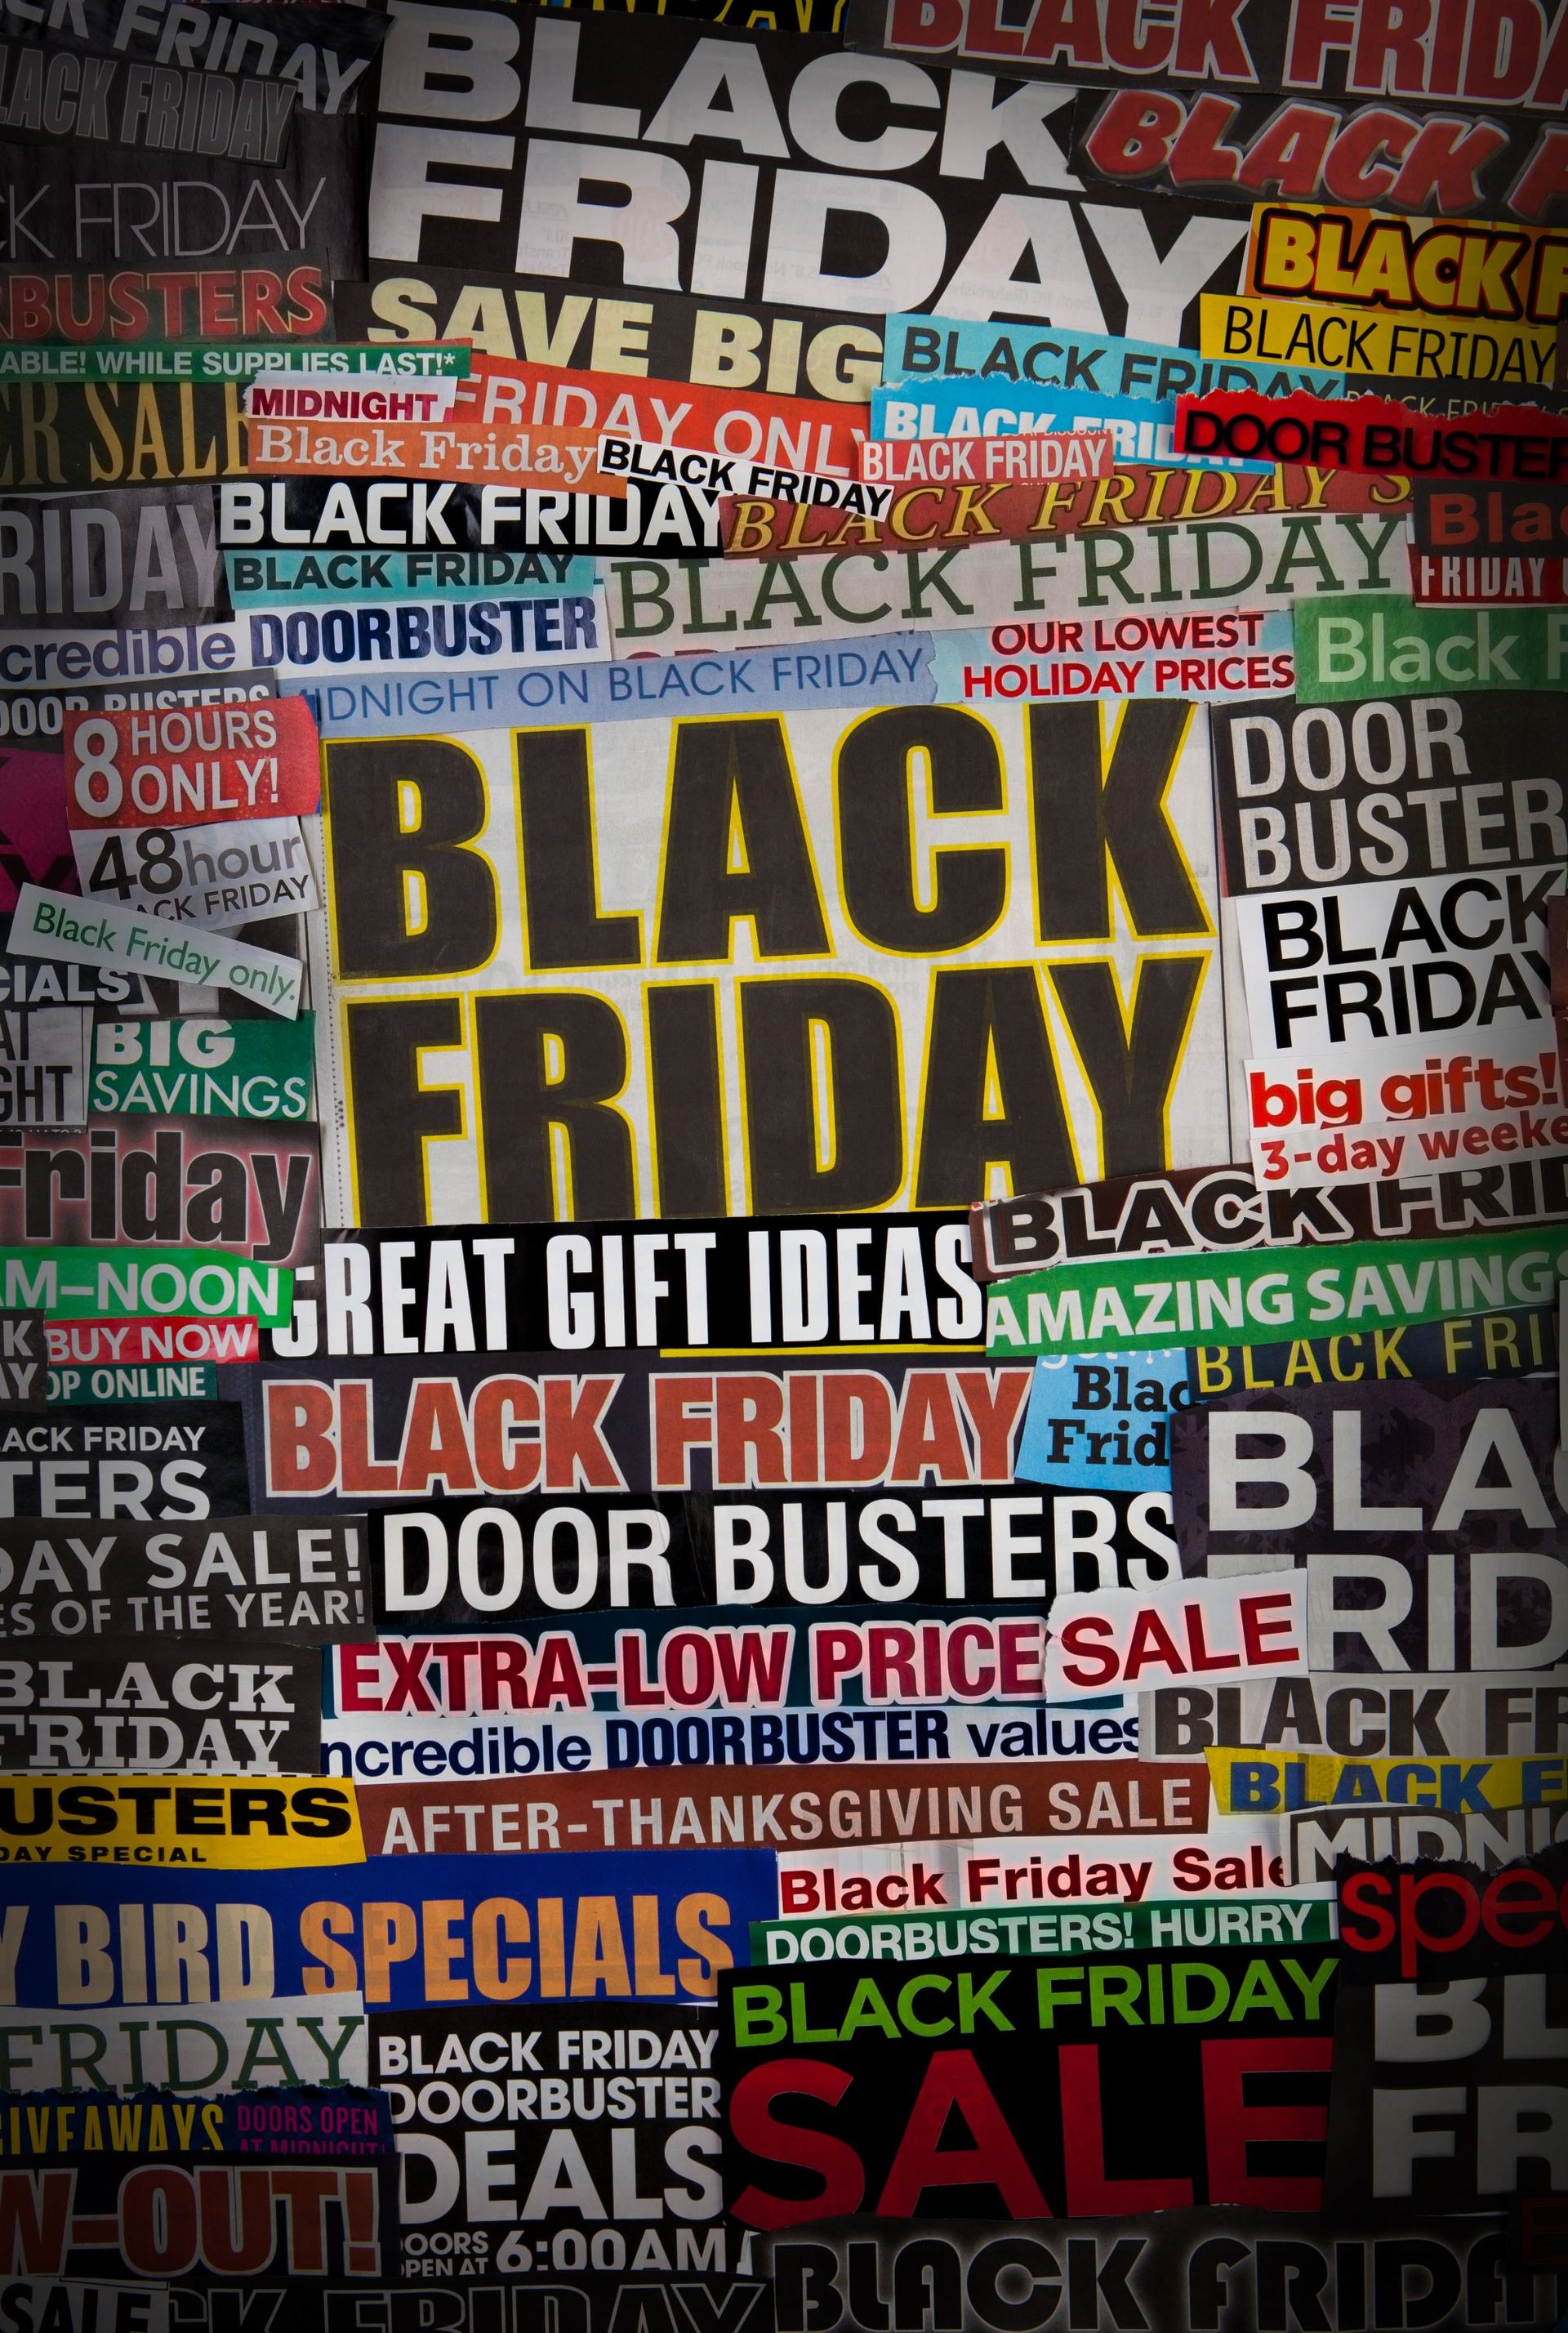 Colorful black friday newspaper collage